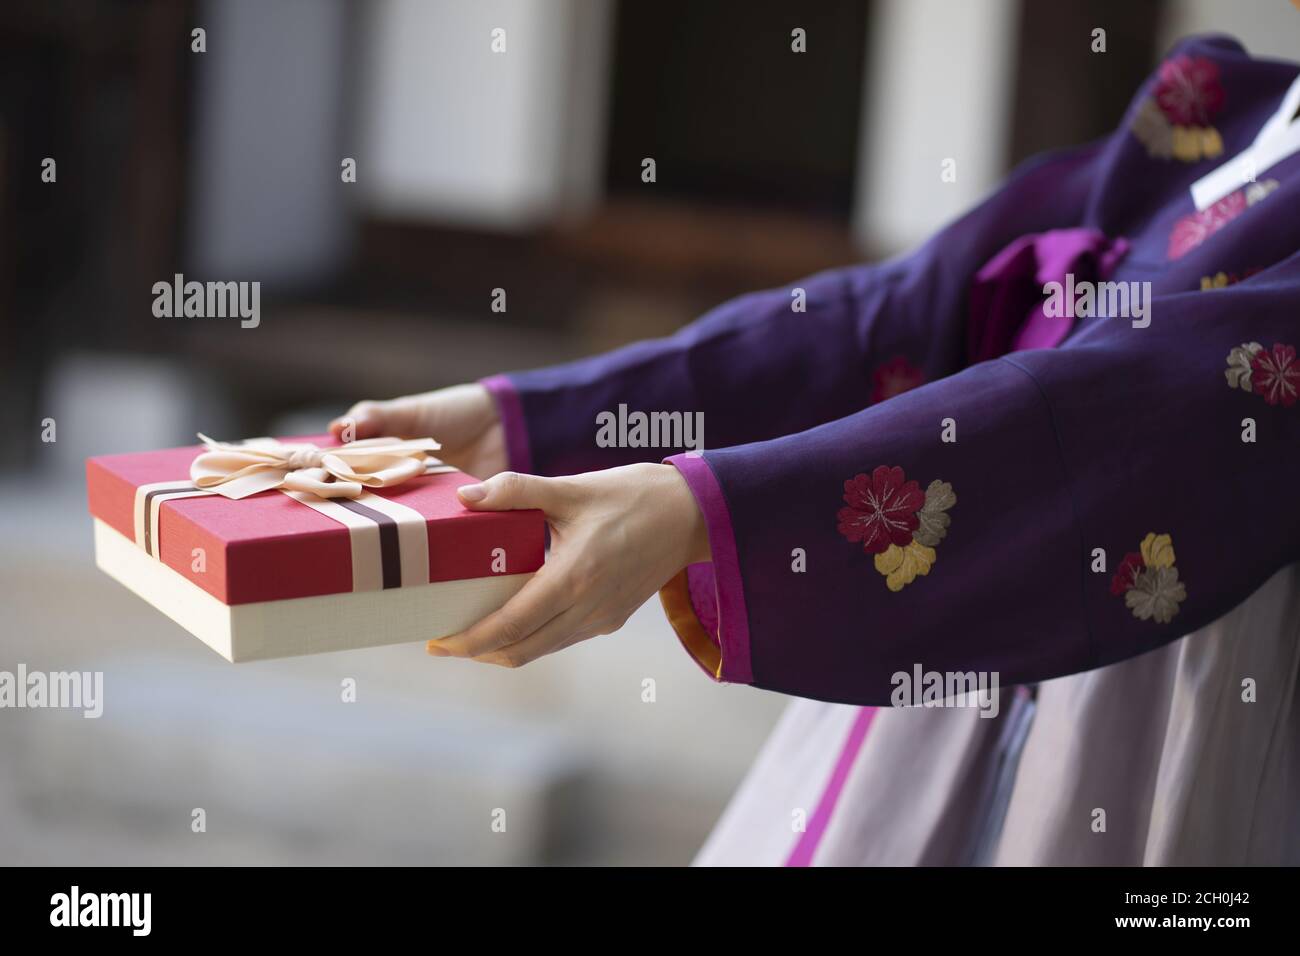 Woman in Korean traditional clothes holding gift box Stock Photo